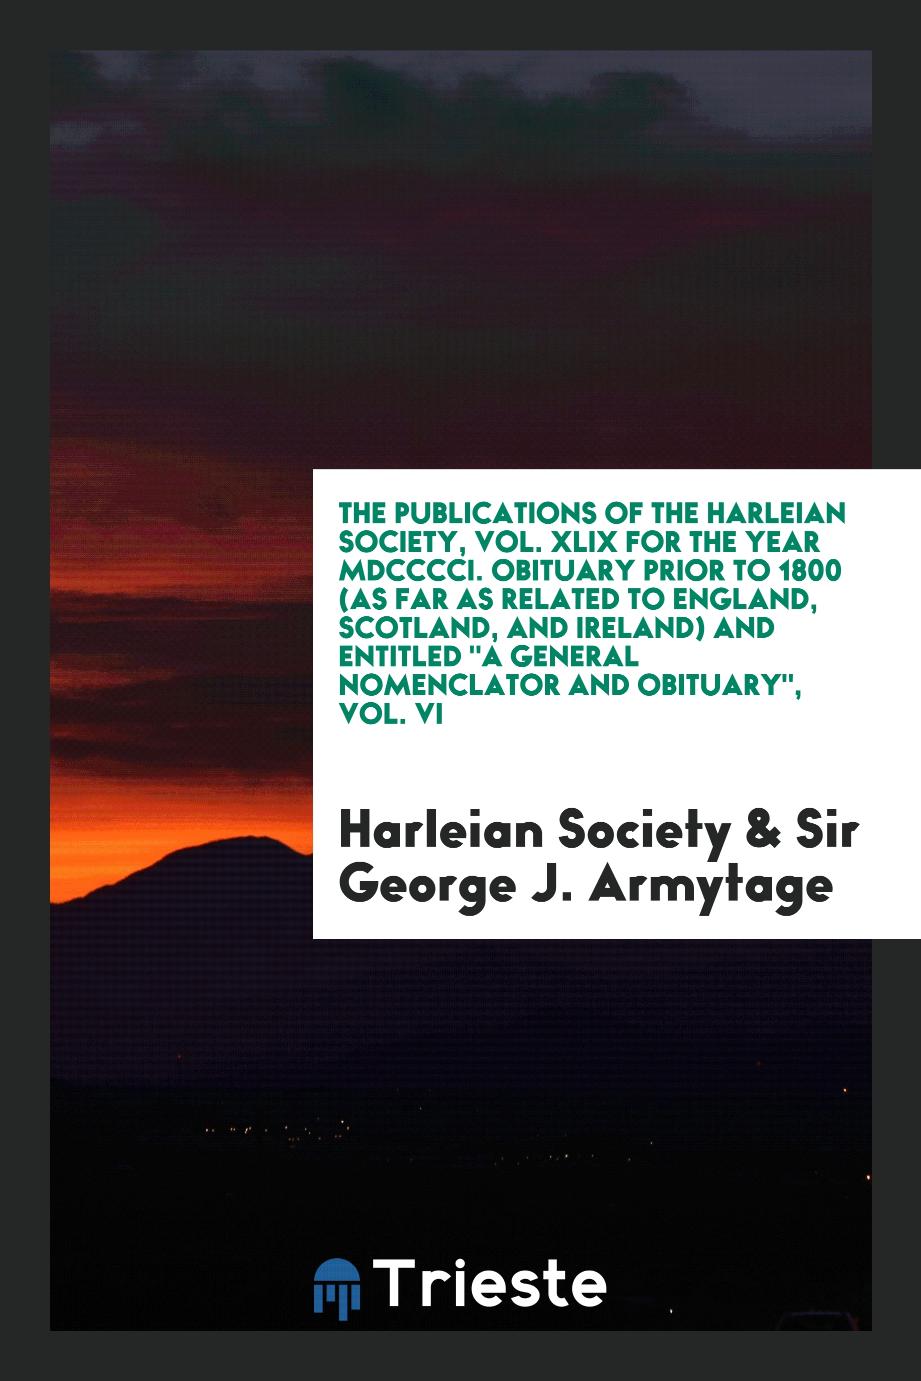 The Publications of the Harleian Society, Vol. XLIX for the Year MDCCCCI. Obituary Prior to 1800 (as Far as Related to England, Scotland, and Ireland) and Entitled "A General Nomenclator and Obituary", Vol. VI